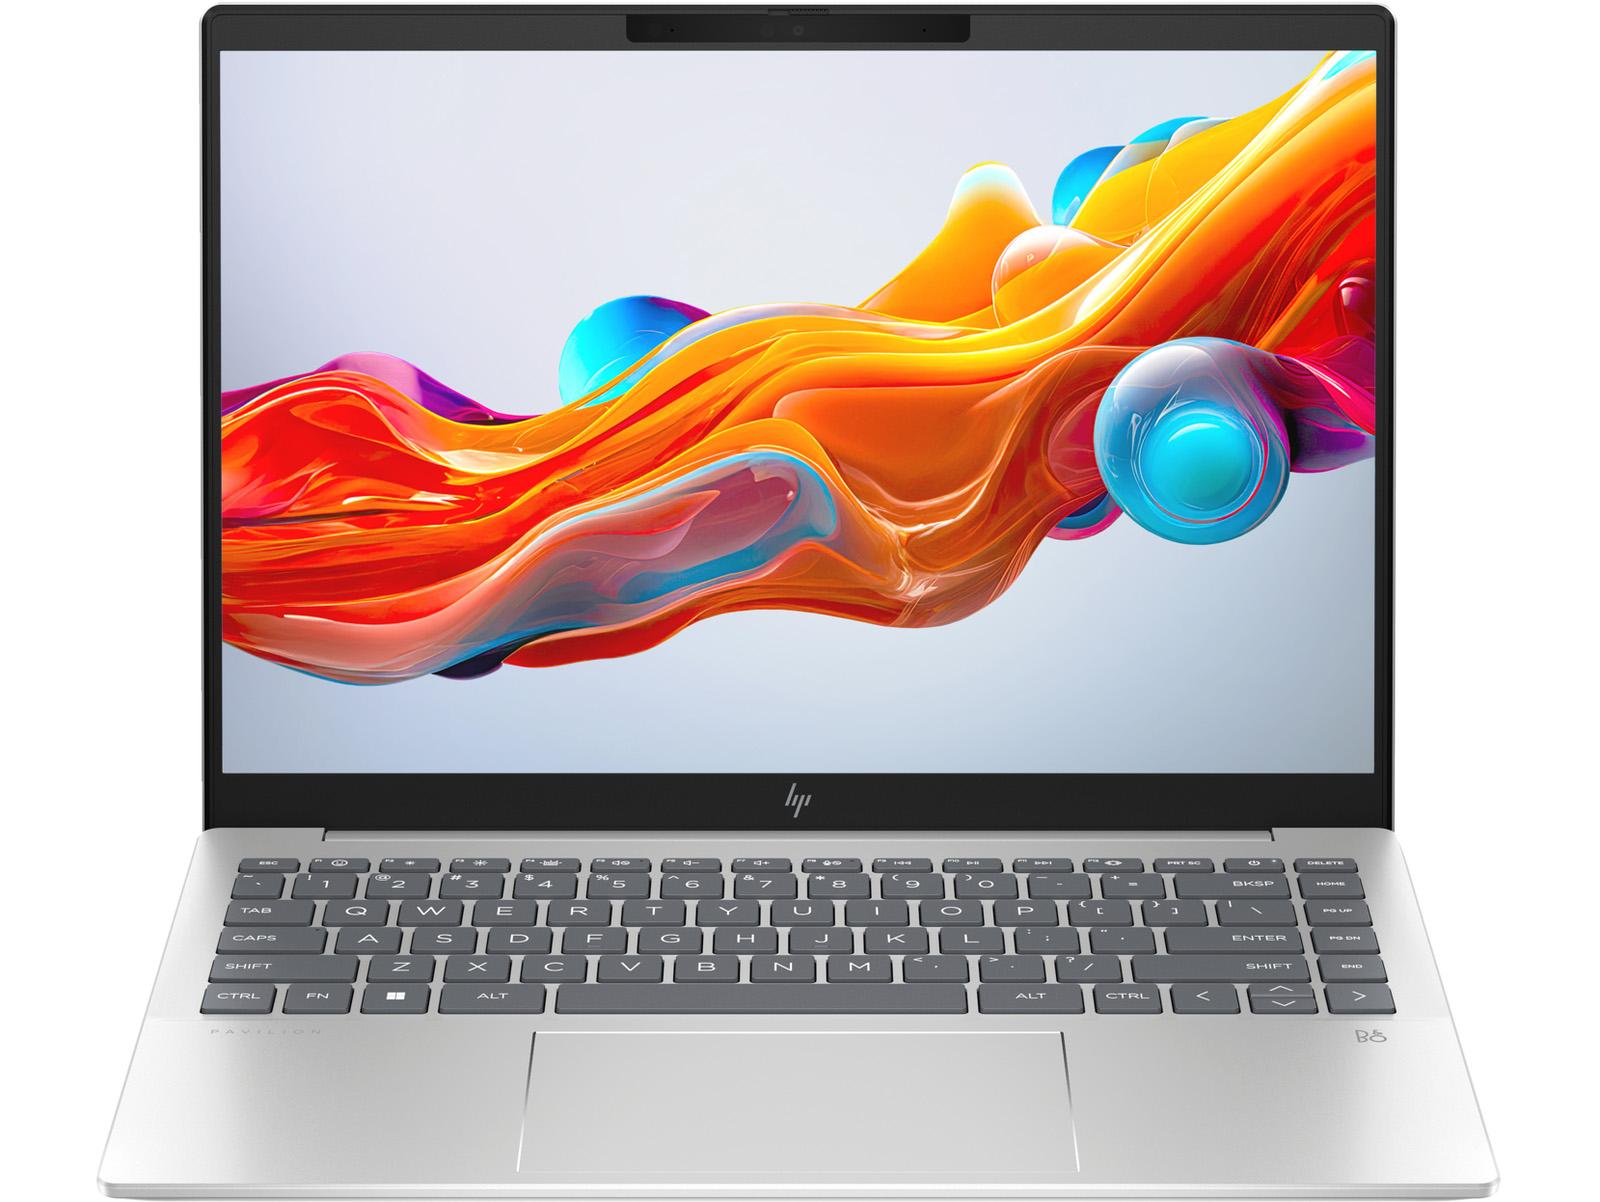 HP Pavilion Plus 14in Ryzen 5 16GB 512GB Notebook Laptop for $599.99 Shipped